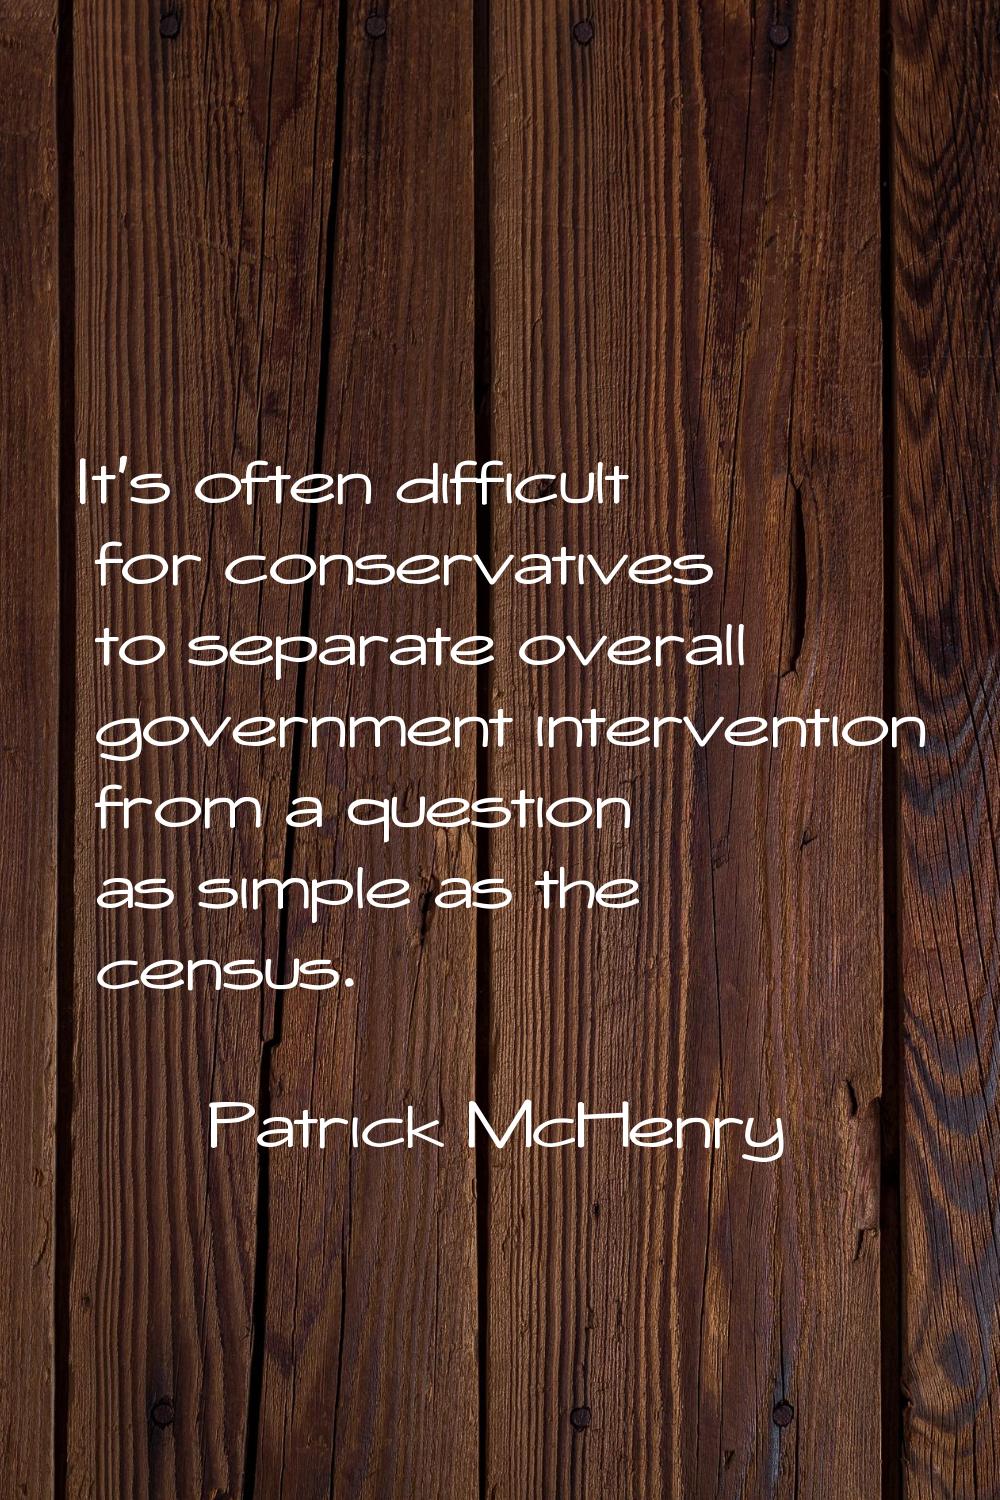 It's often difficult for conservatives to separate overall government intervention from a question 